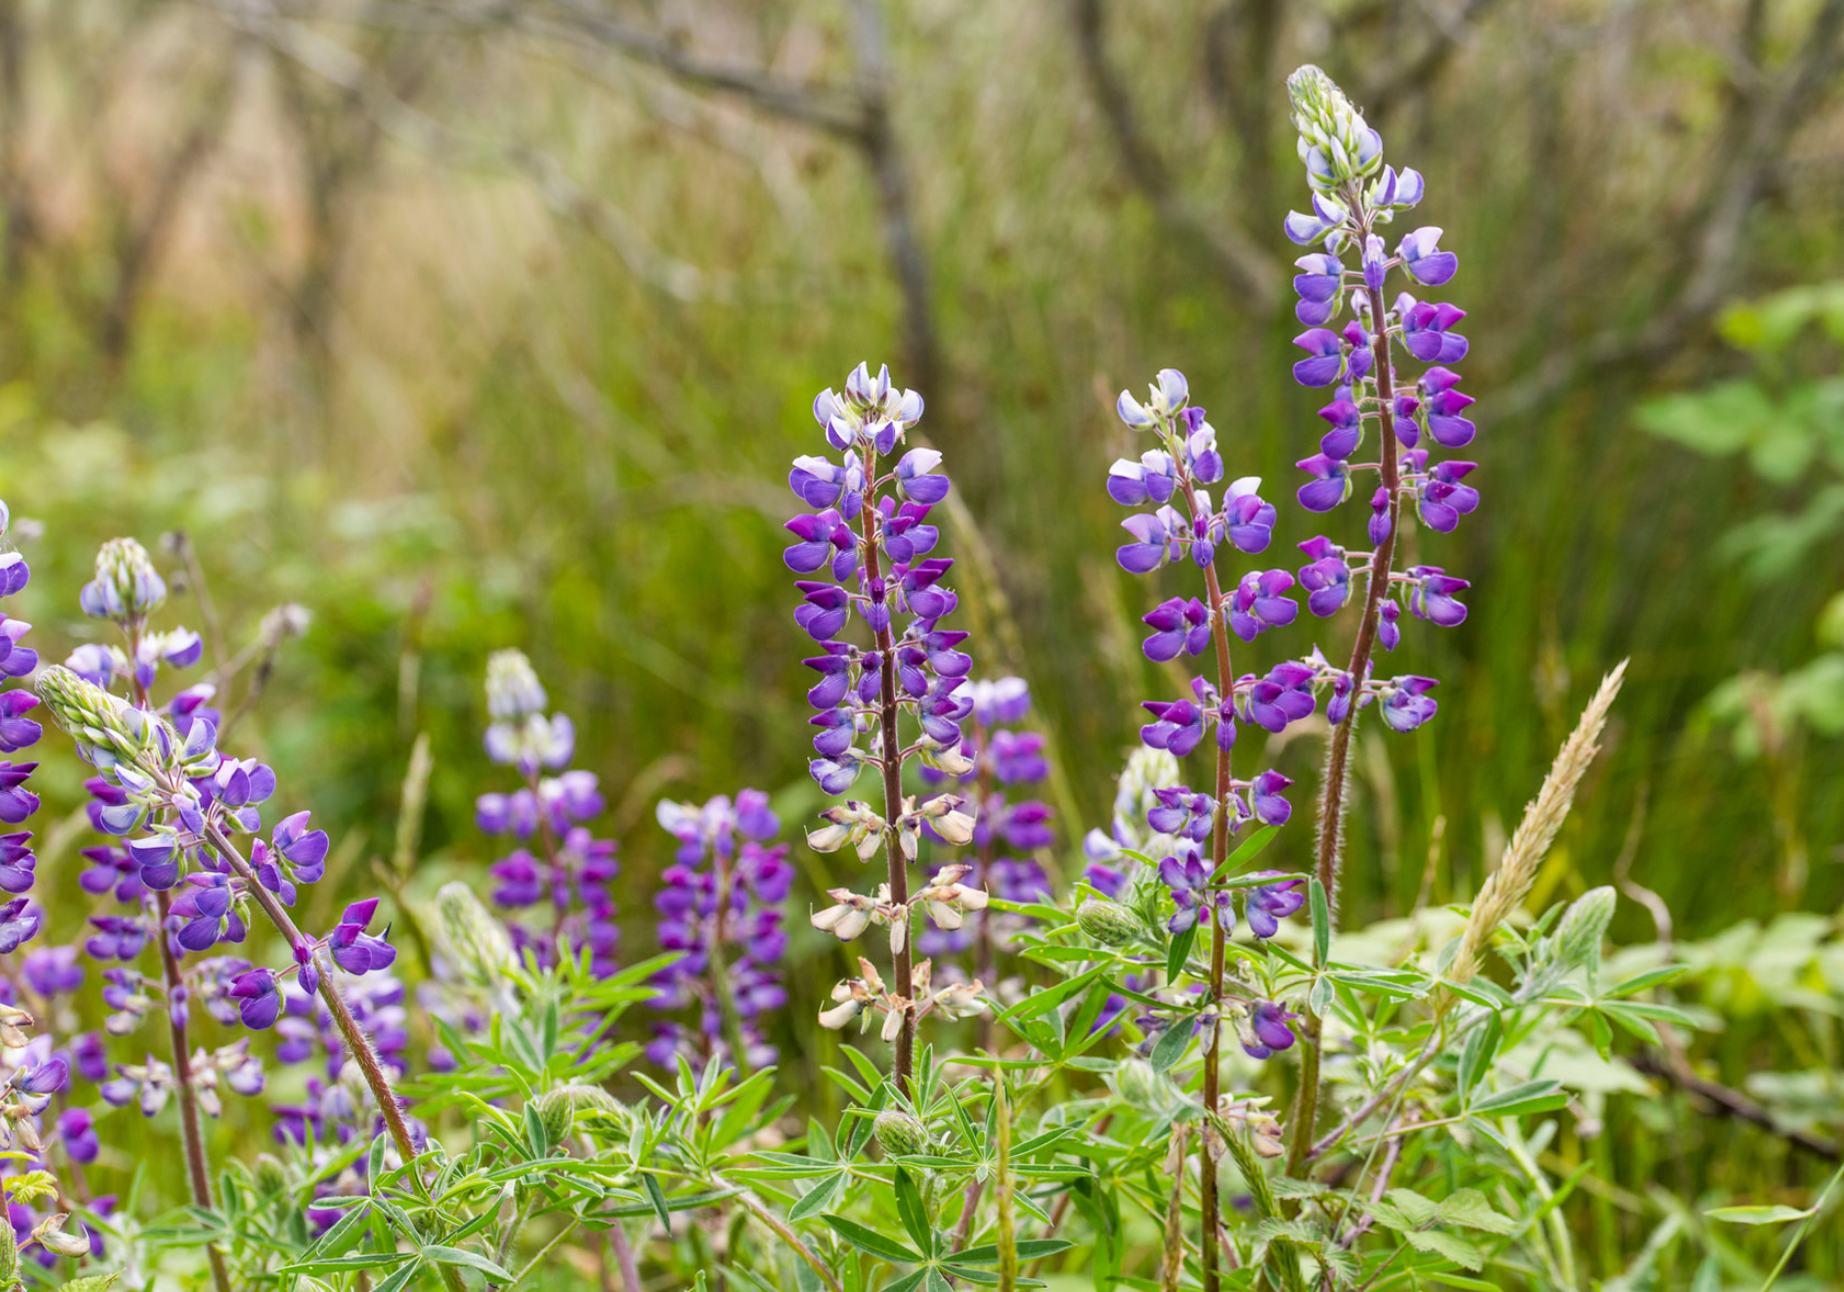 Lupine by Humboldt Flickr 2020